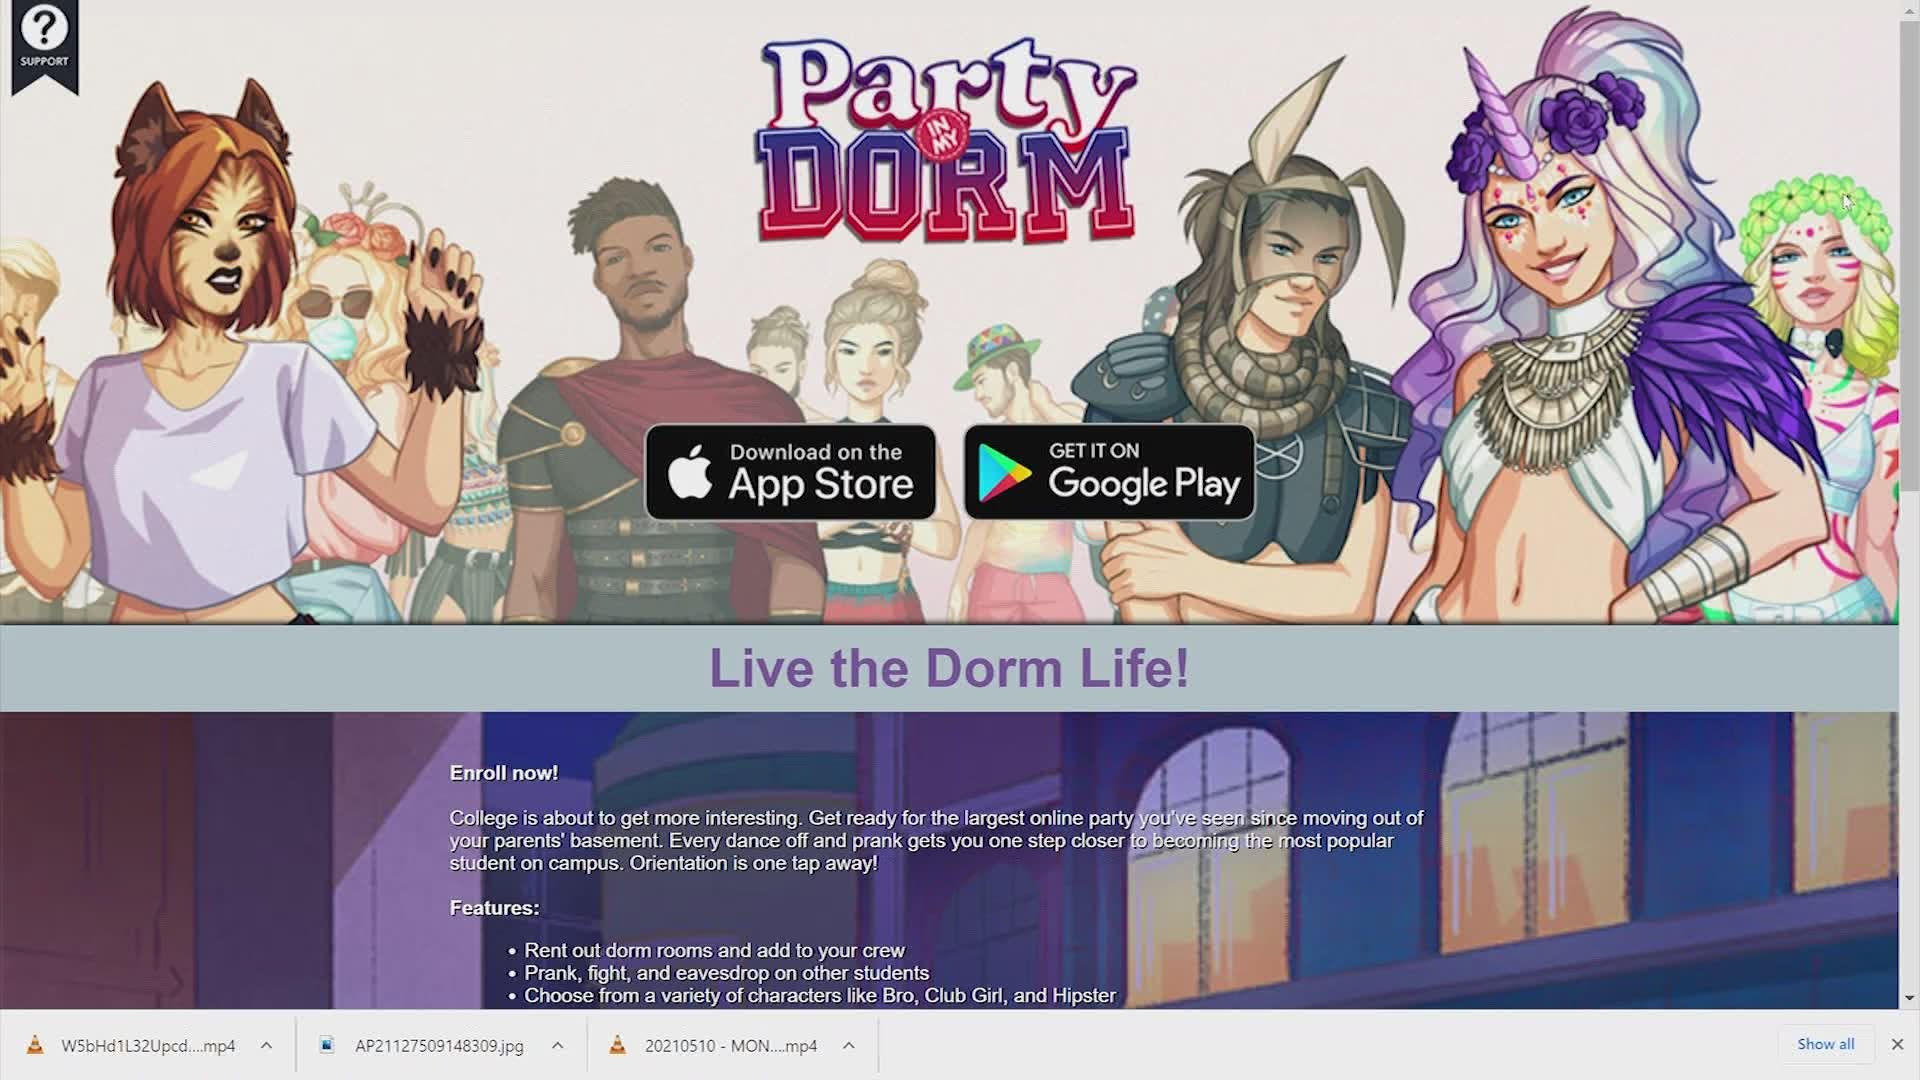 The role-playing app called Party in my Dorm targets teens and could attract sexual predators, according to the school district.